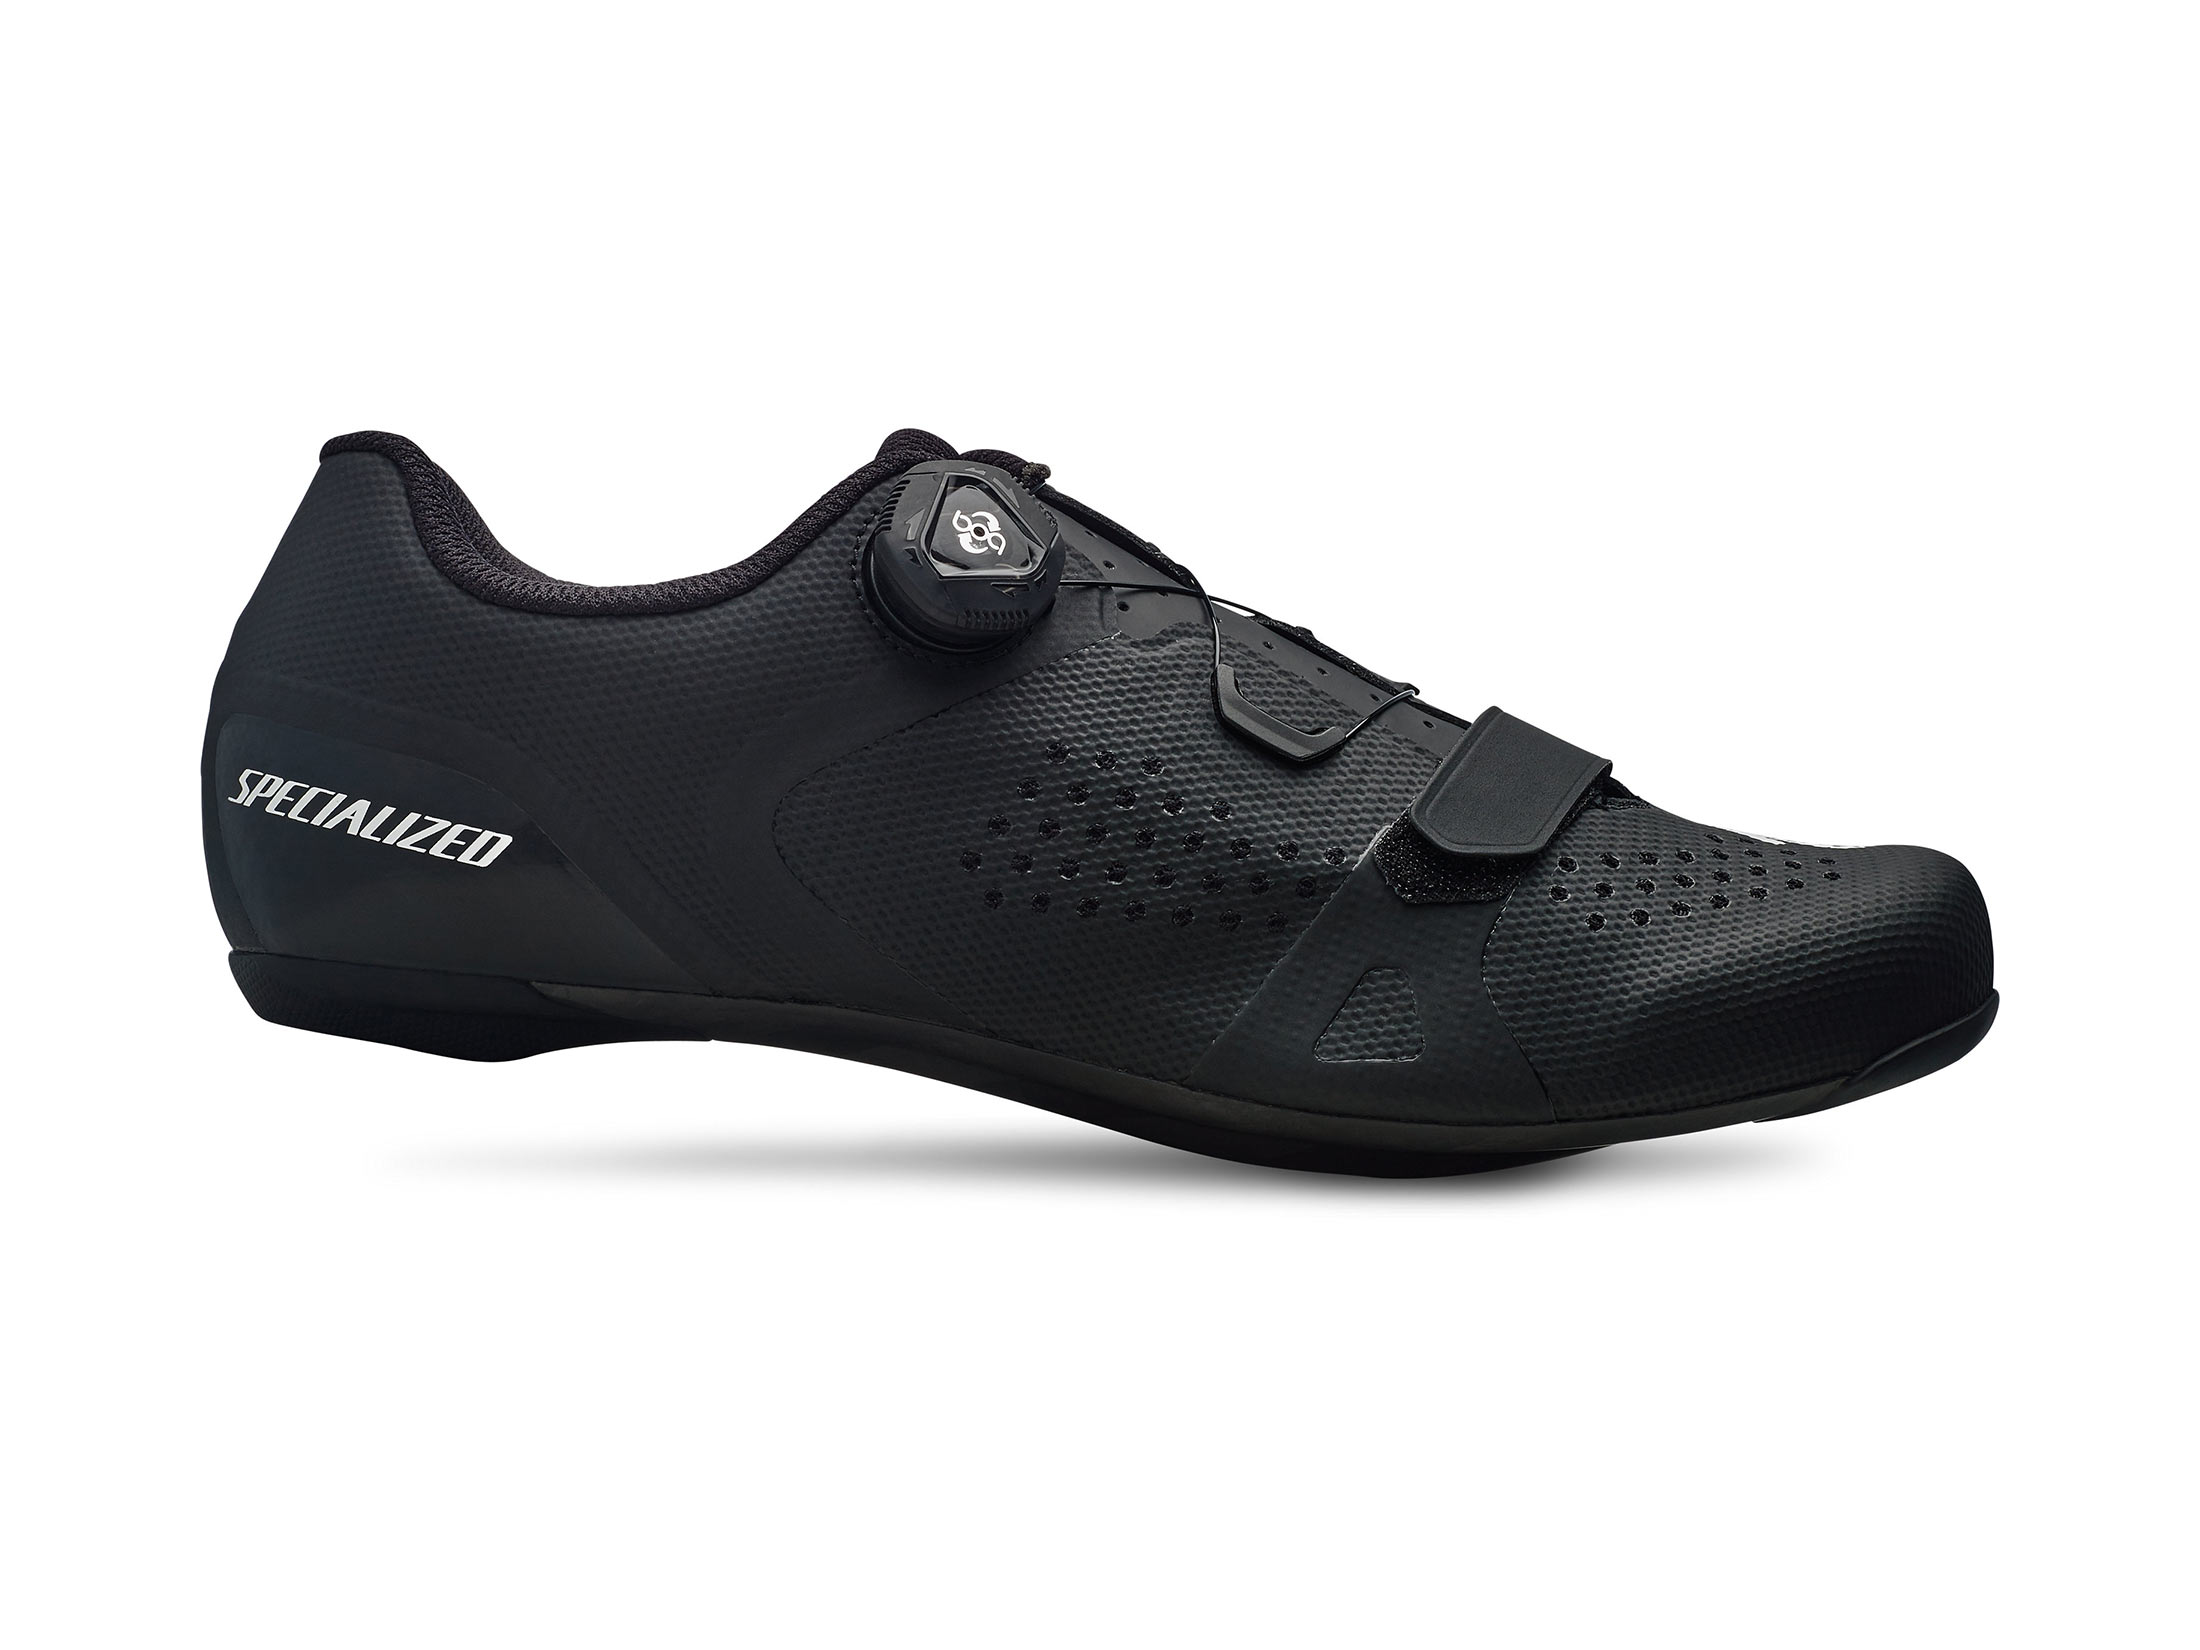 Specialized Torch 2.0 Road Shoes - Black